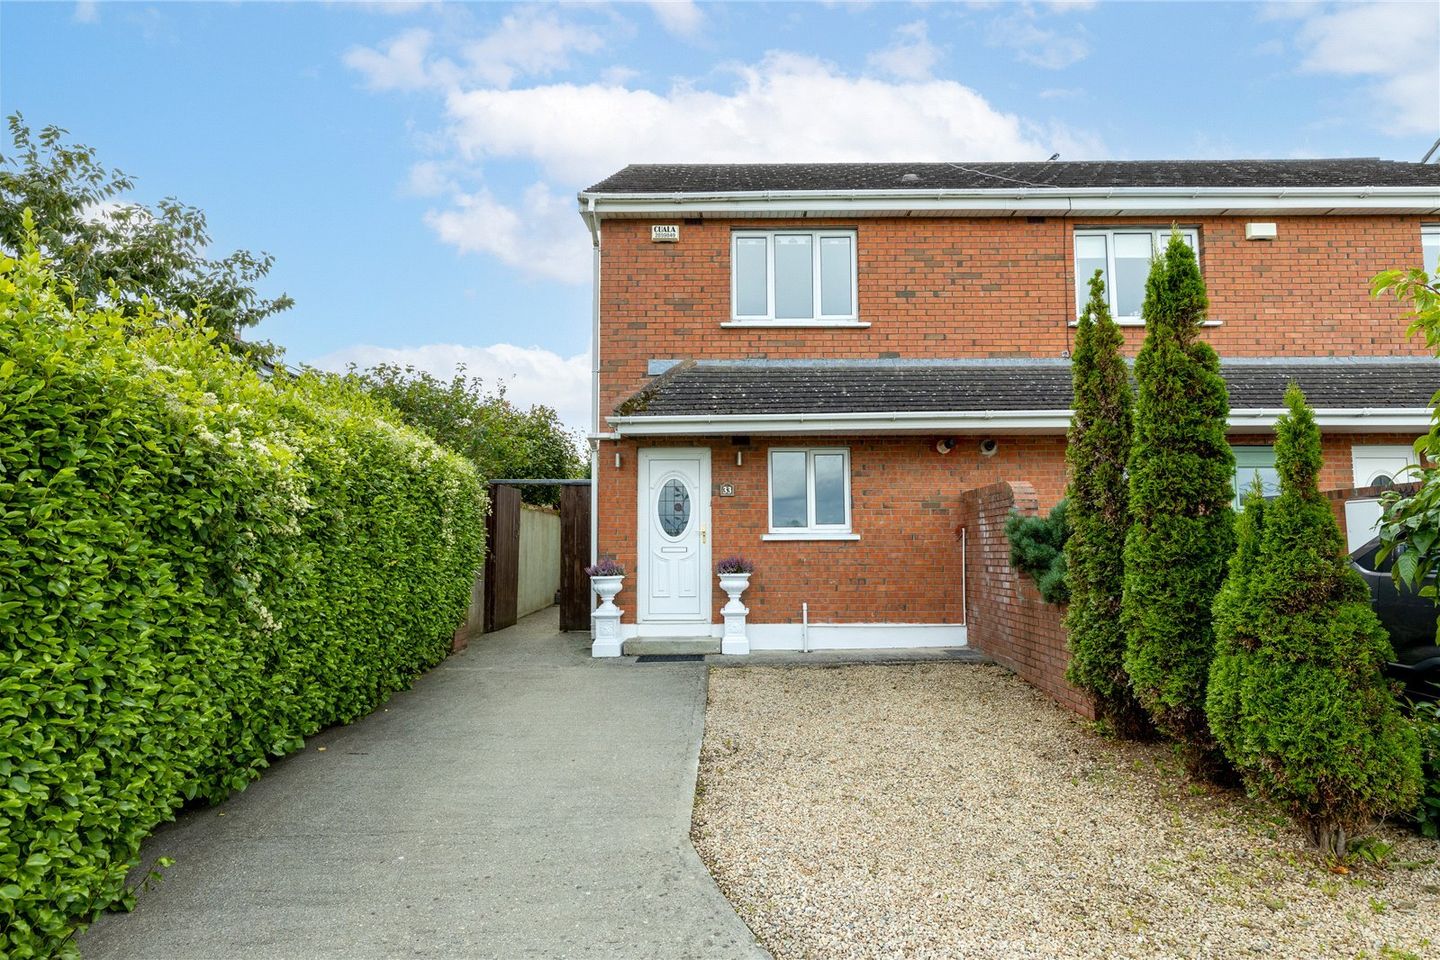 33 Vevay Crescent, Bray, Co. Wicklow, A98VY76